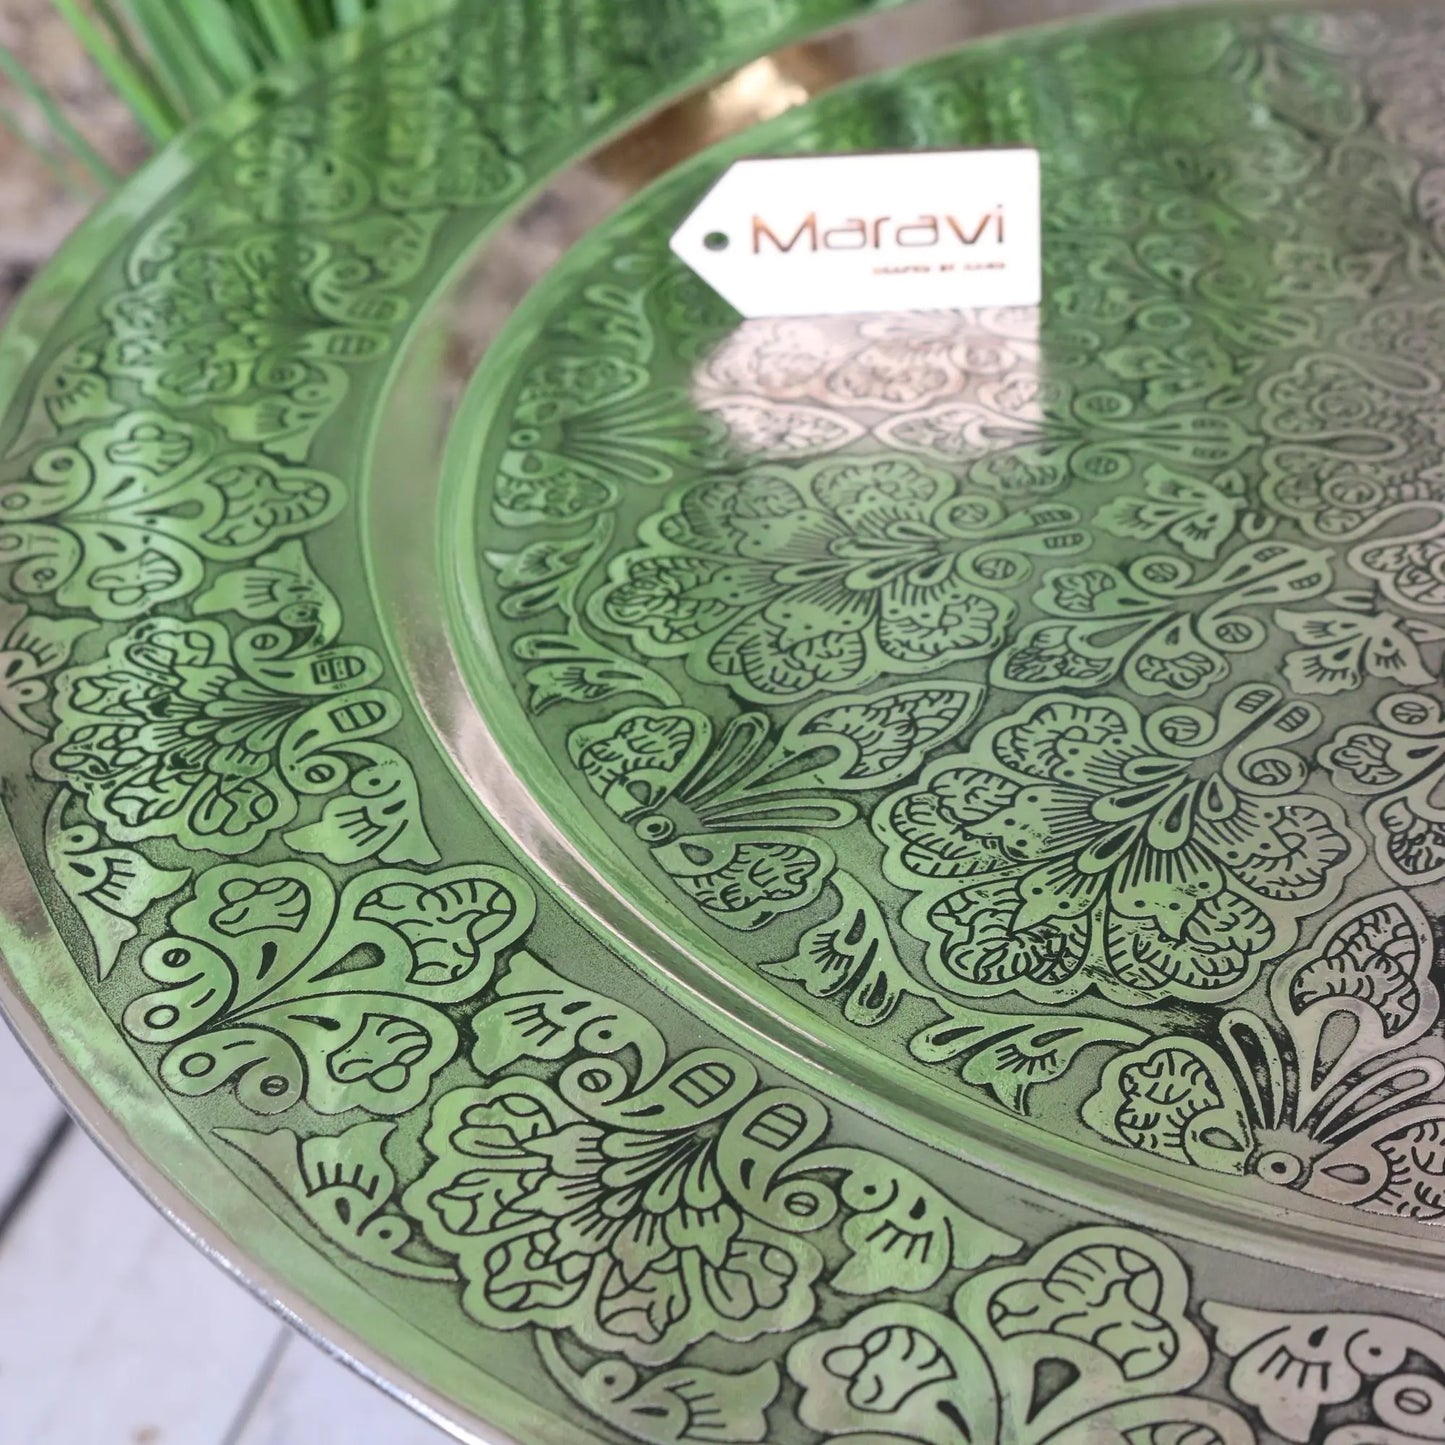 Jadida Moroccan Tray Table 60cm - Closeup of Etched Design